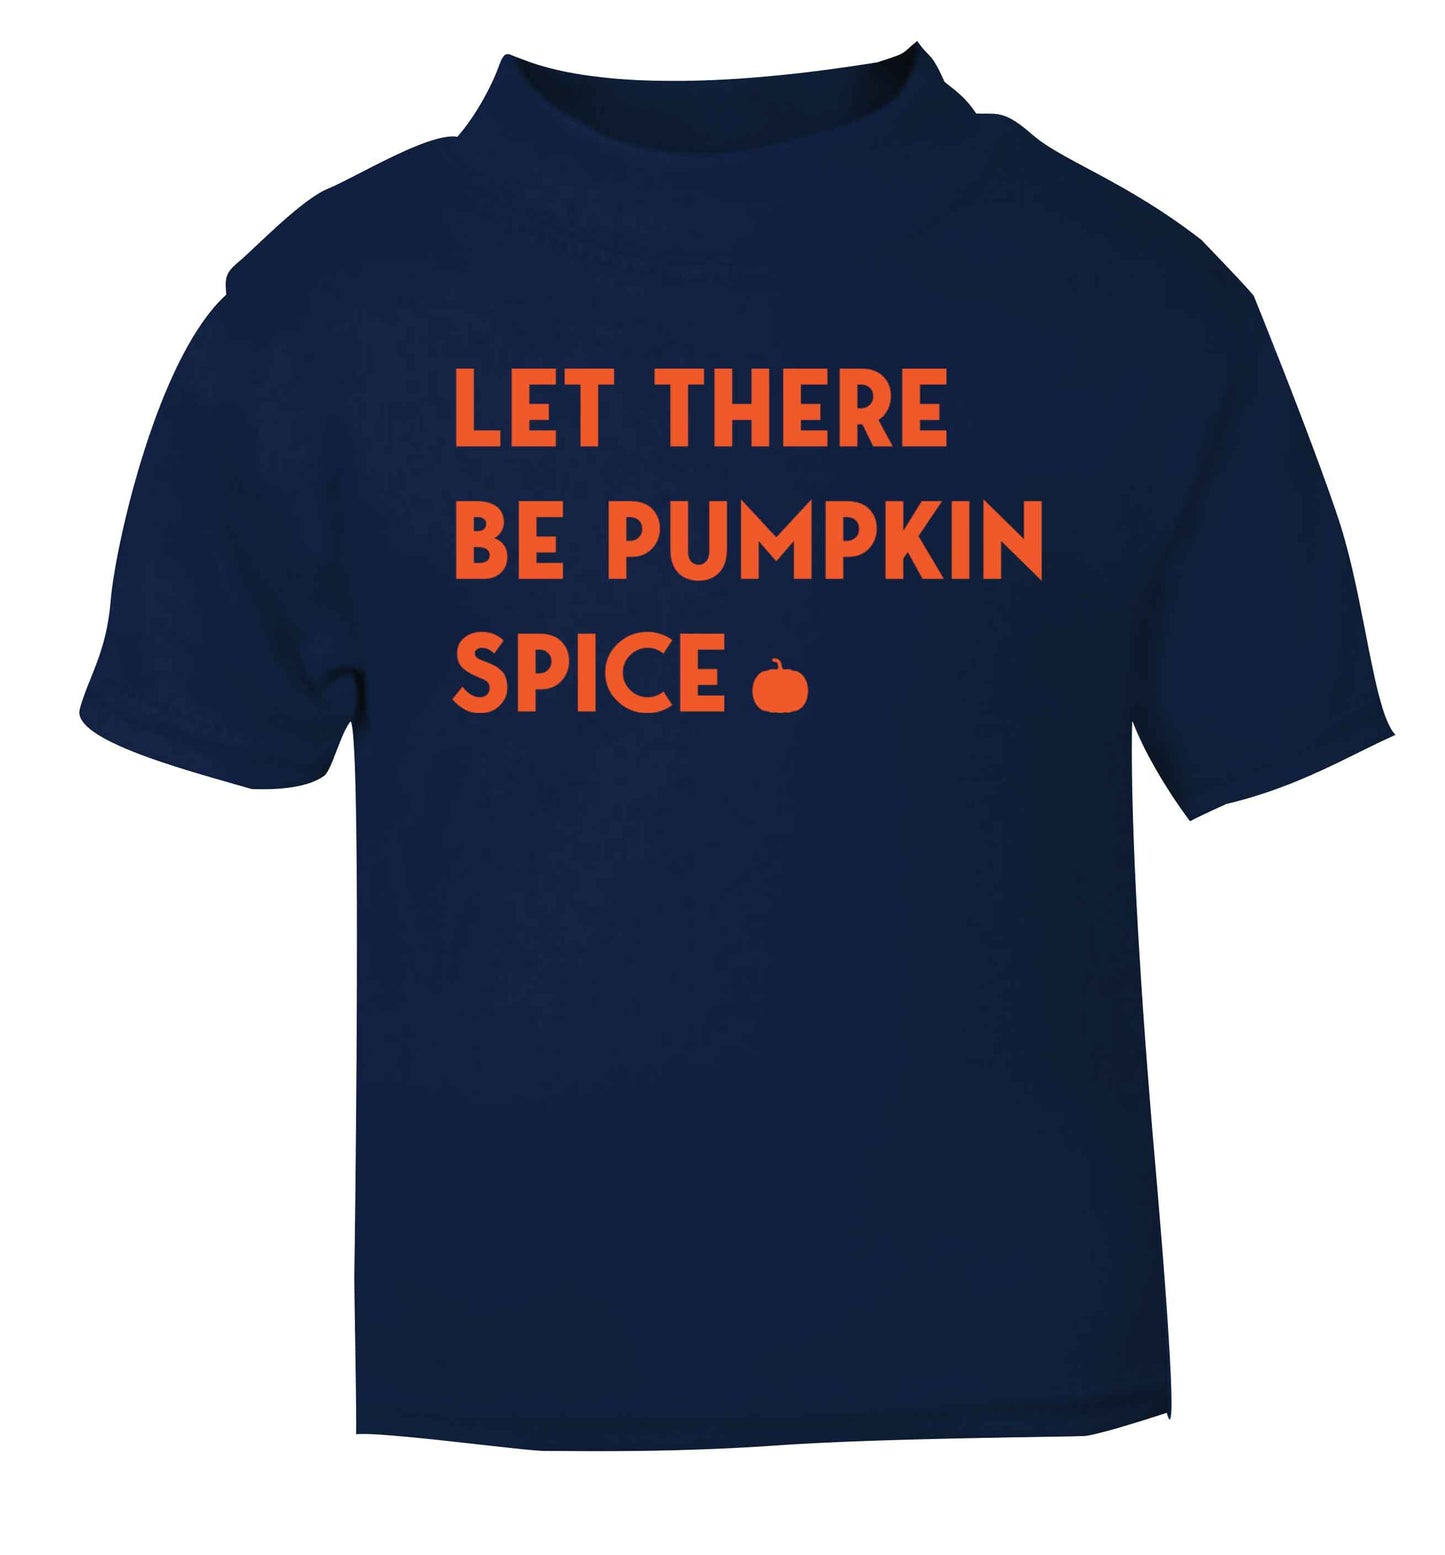 Let Be Pumpkin Spice navy baby toddler Tshirt 2 Years